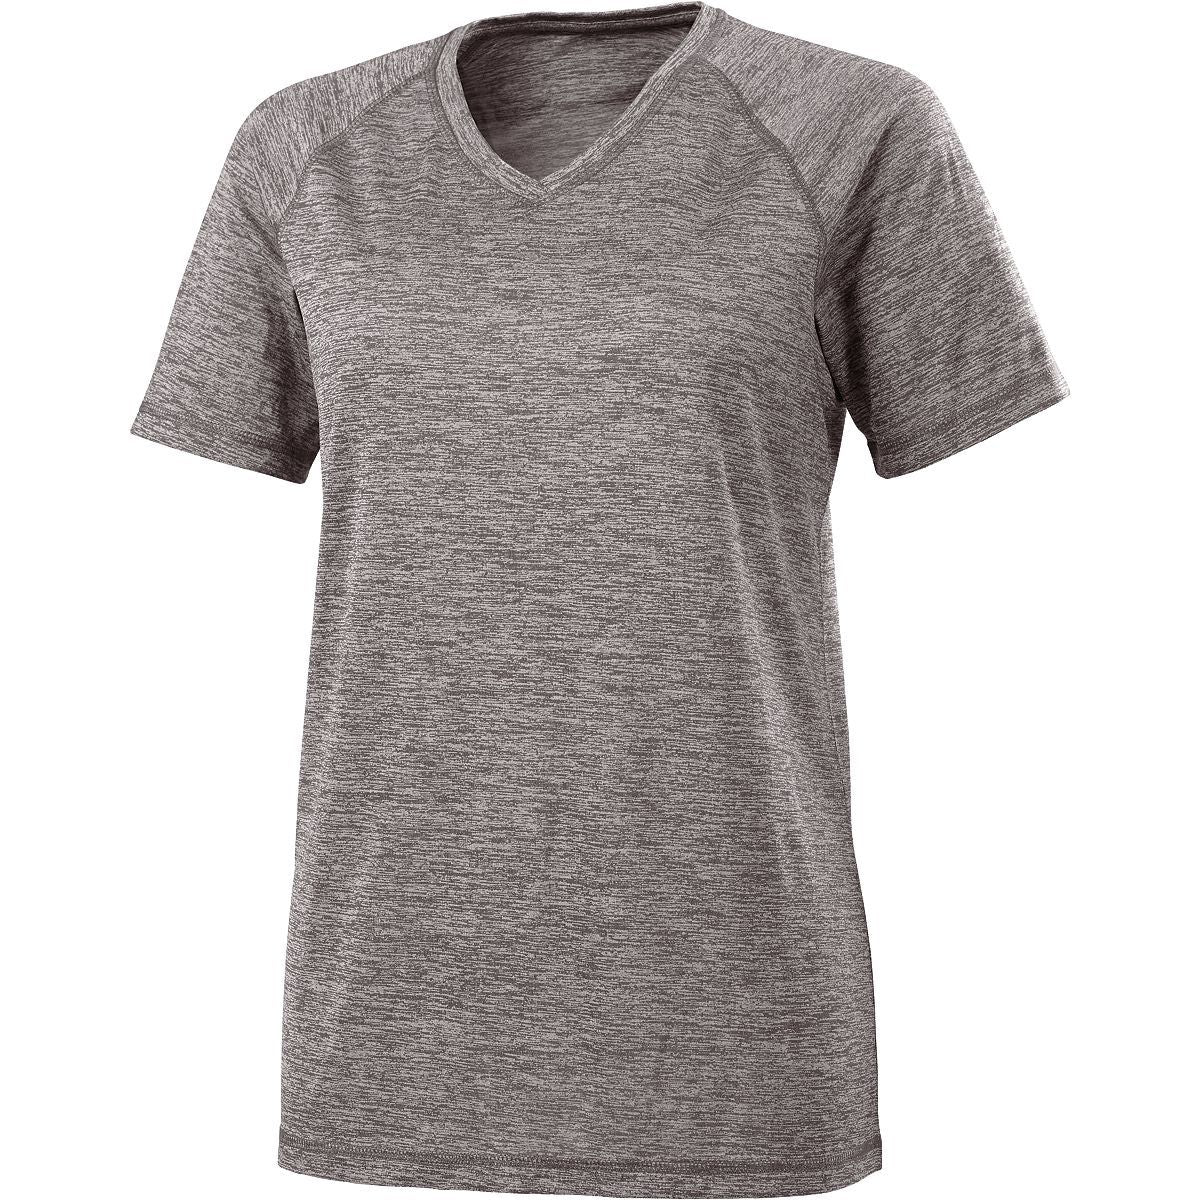 Holloway Ladies Electrify 2.0  Short Sleeve Shirt V-Neck in Graphite Heather  -Part of the Ladies, Holloway, Shirts product lines at KanaleyCreations.com